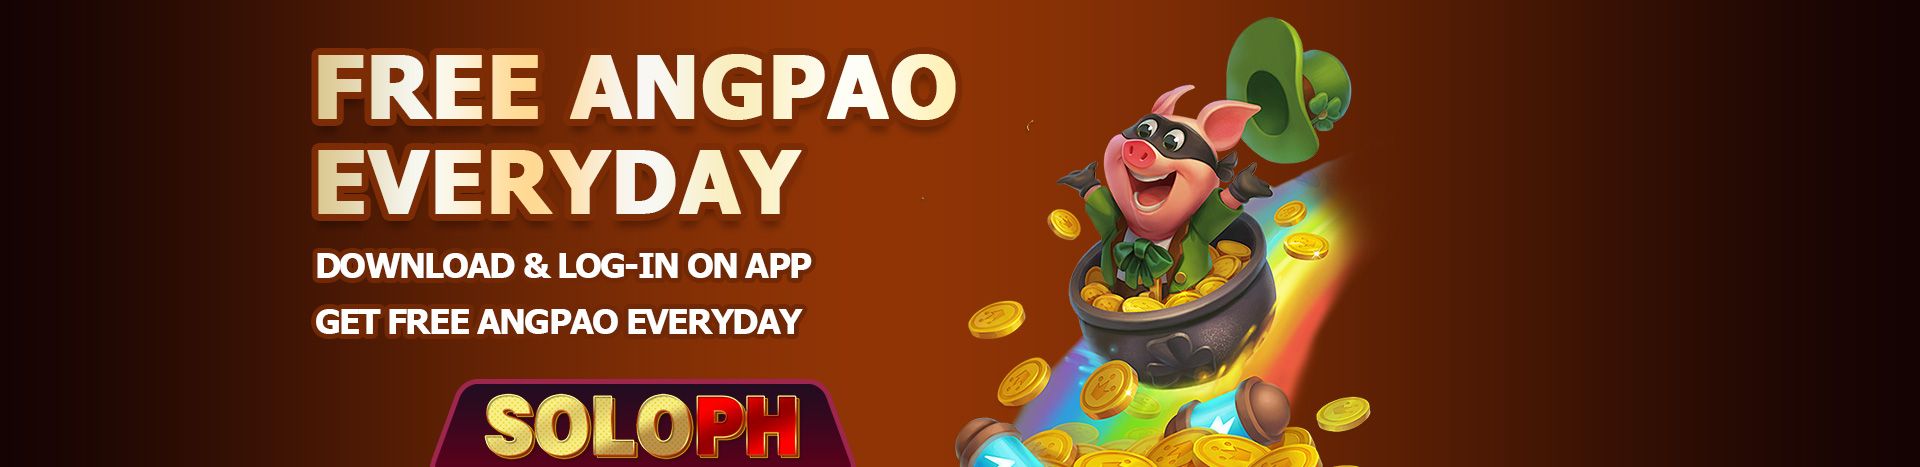 soloph free angpao everyday banner